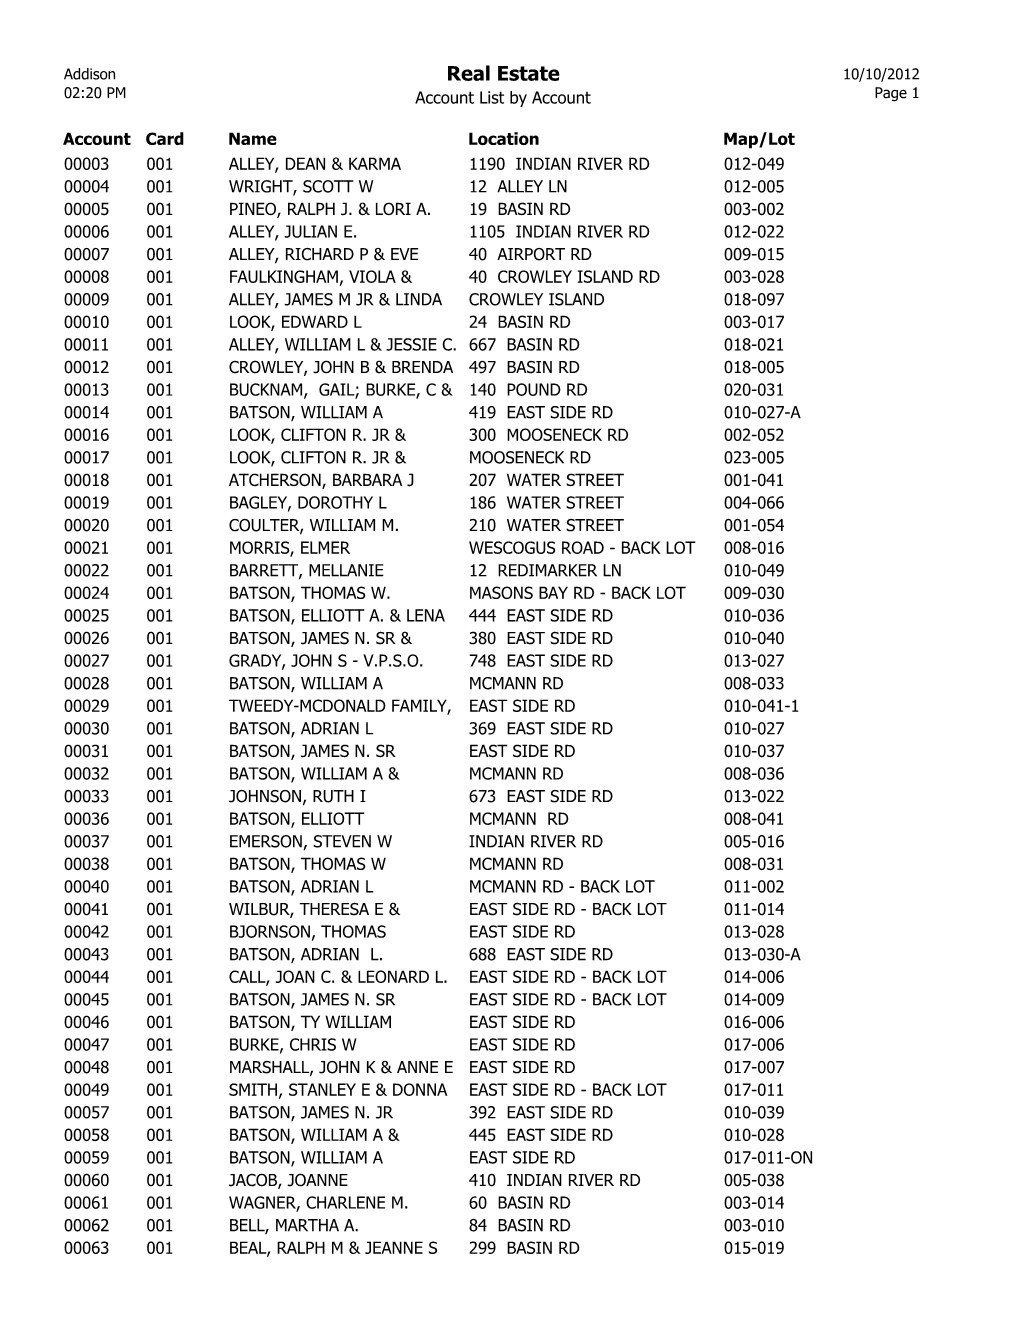 Real Estate 10/10/2012 02:20 PM Account List by Account Page 1